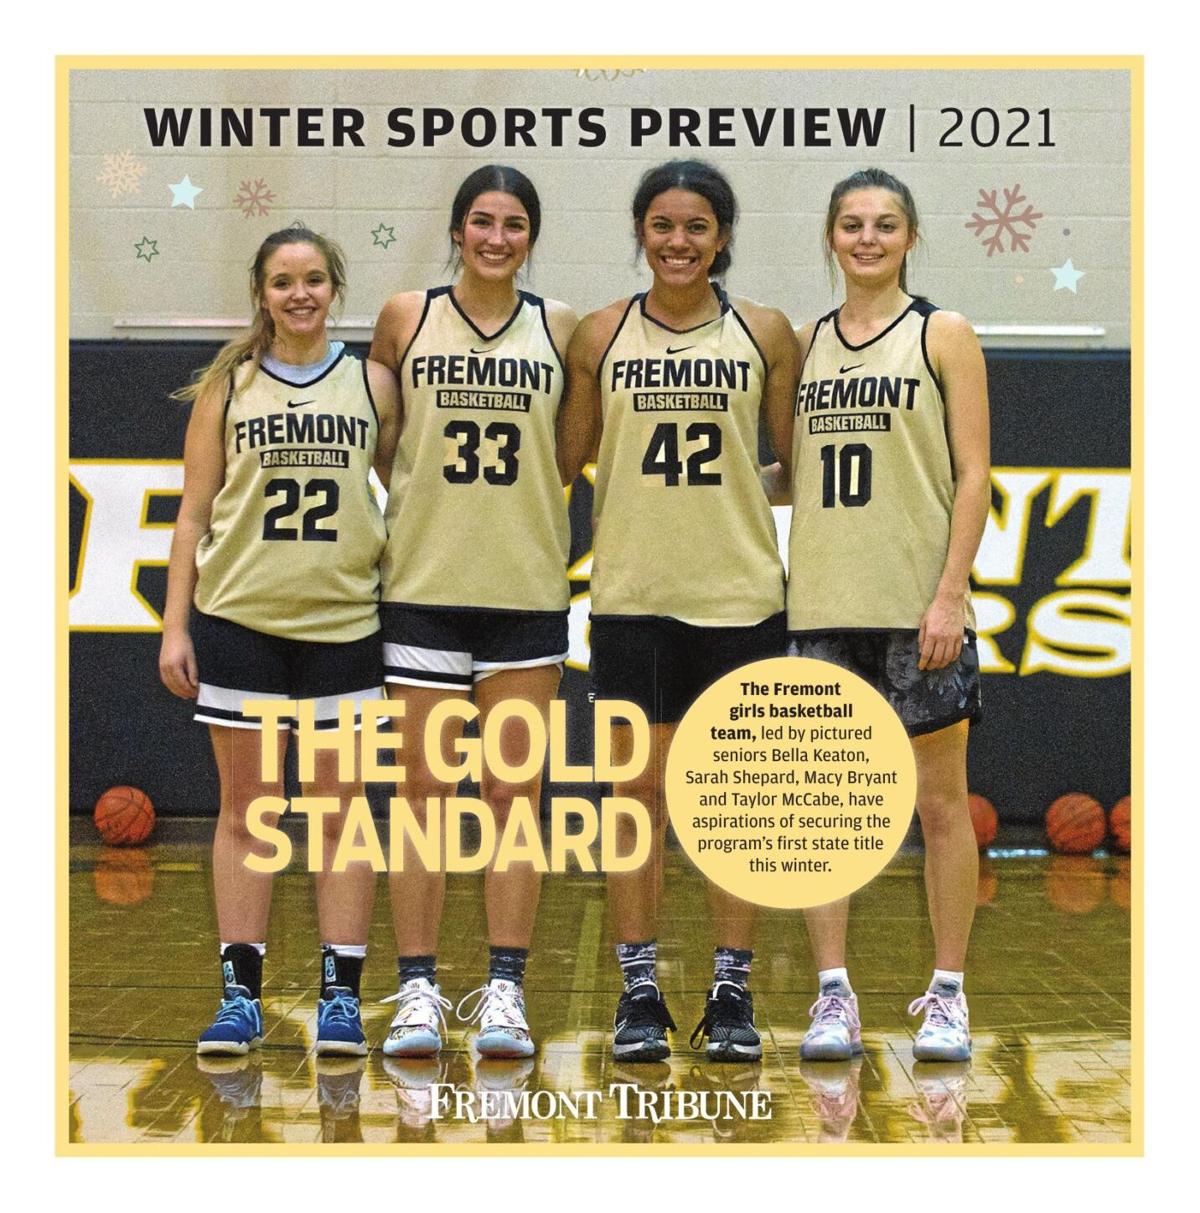 Winter Sports Preview 2021